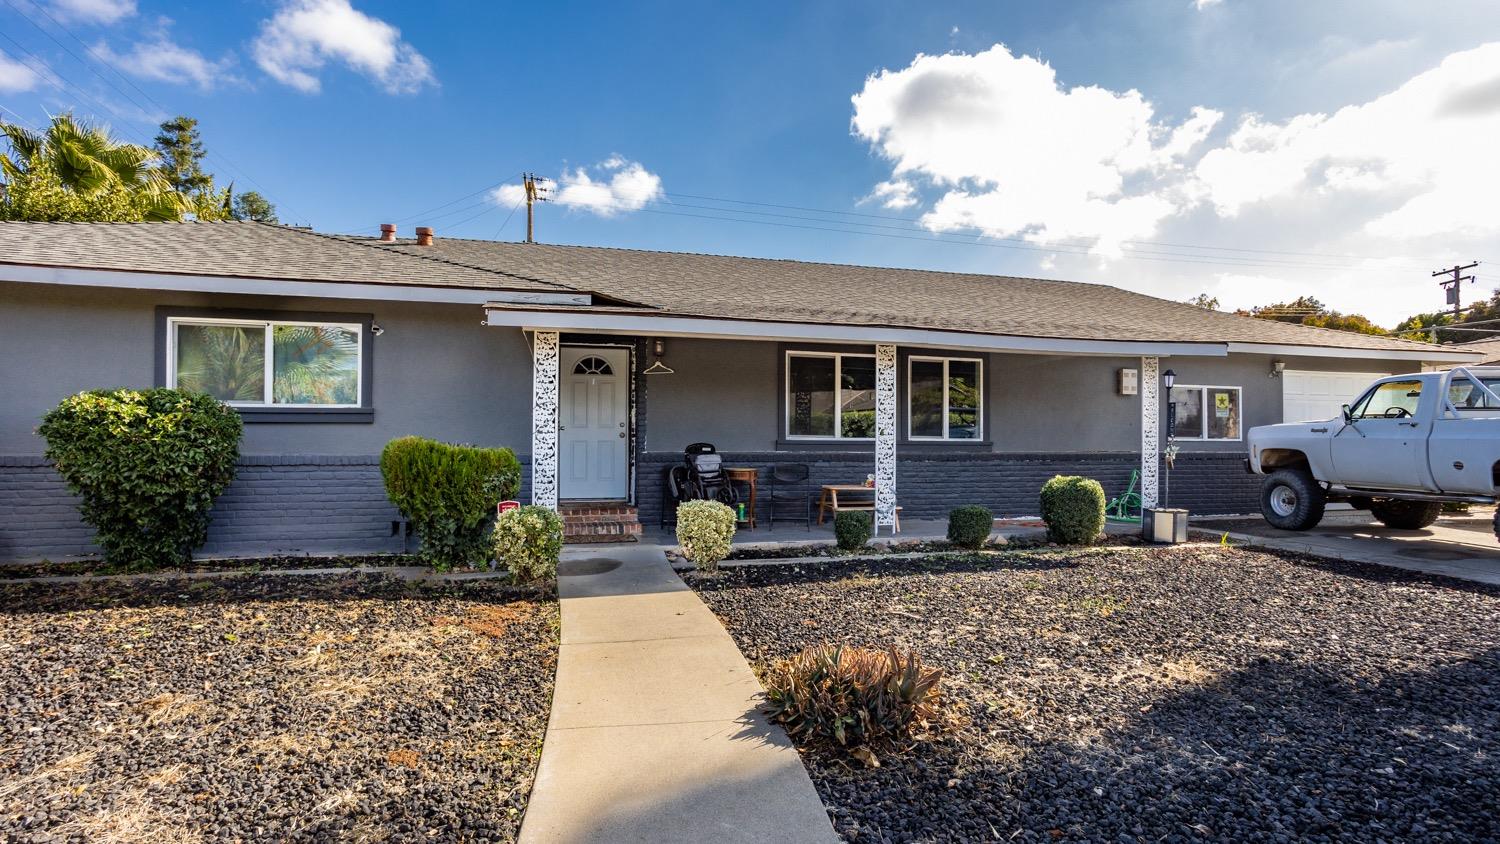 Photo of 1124 Lakewood Ave in Modesto, CA